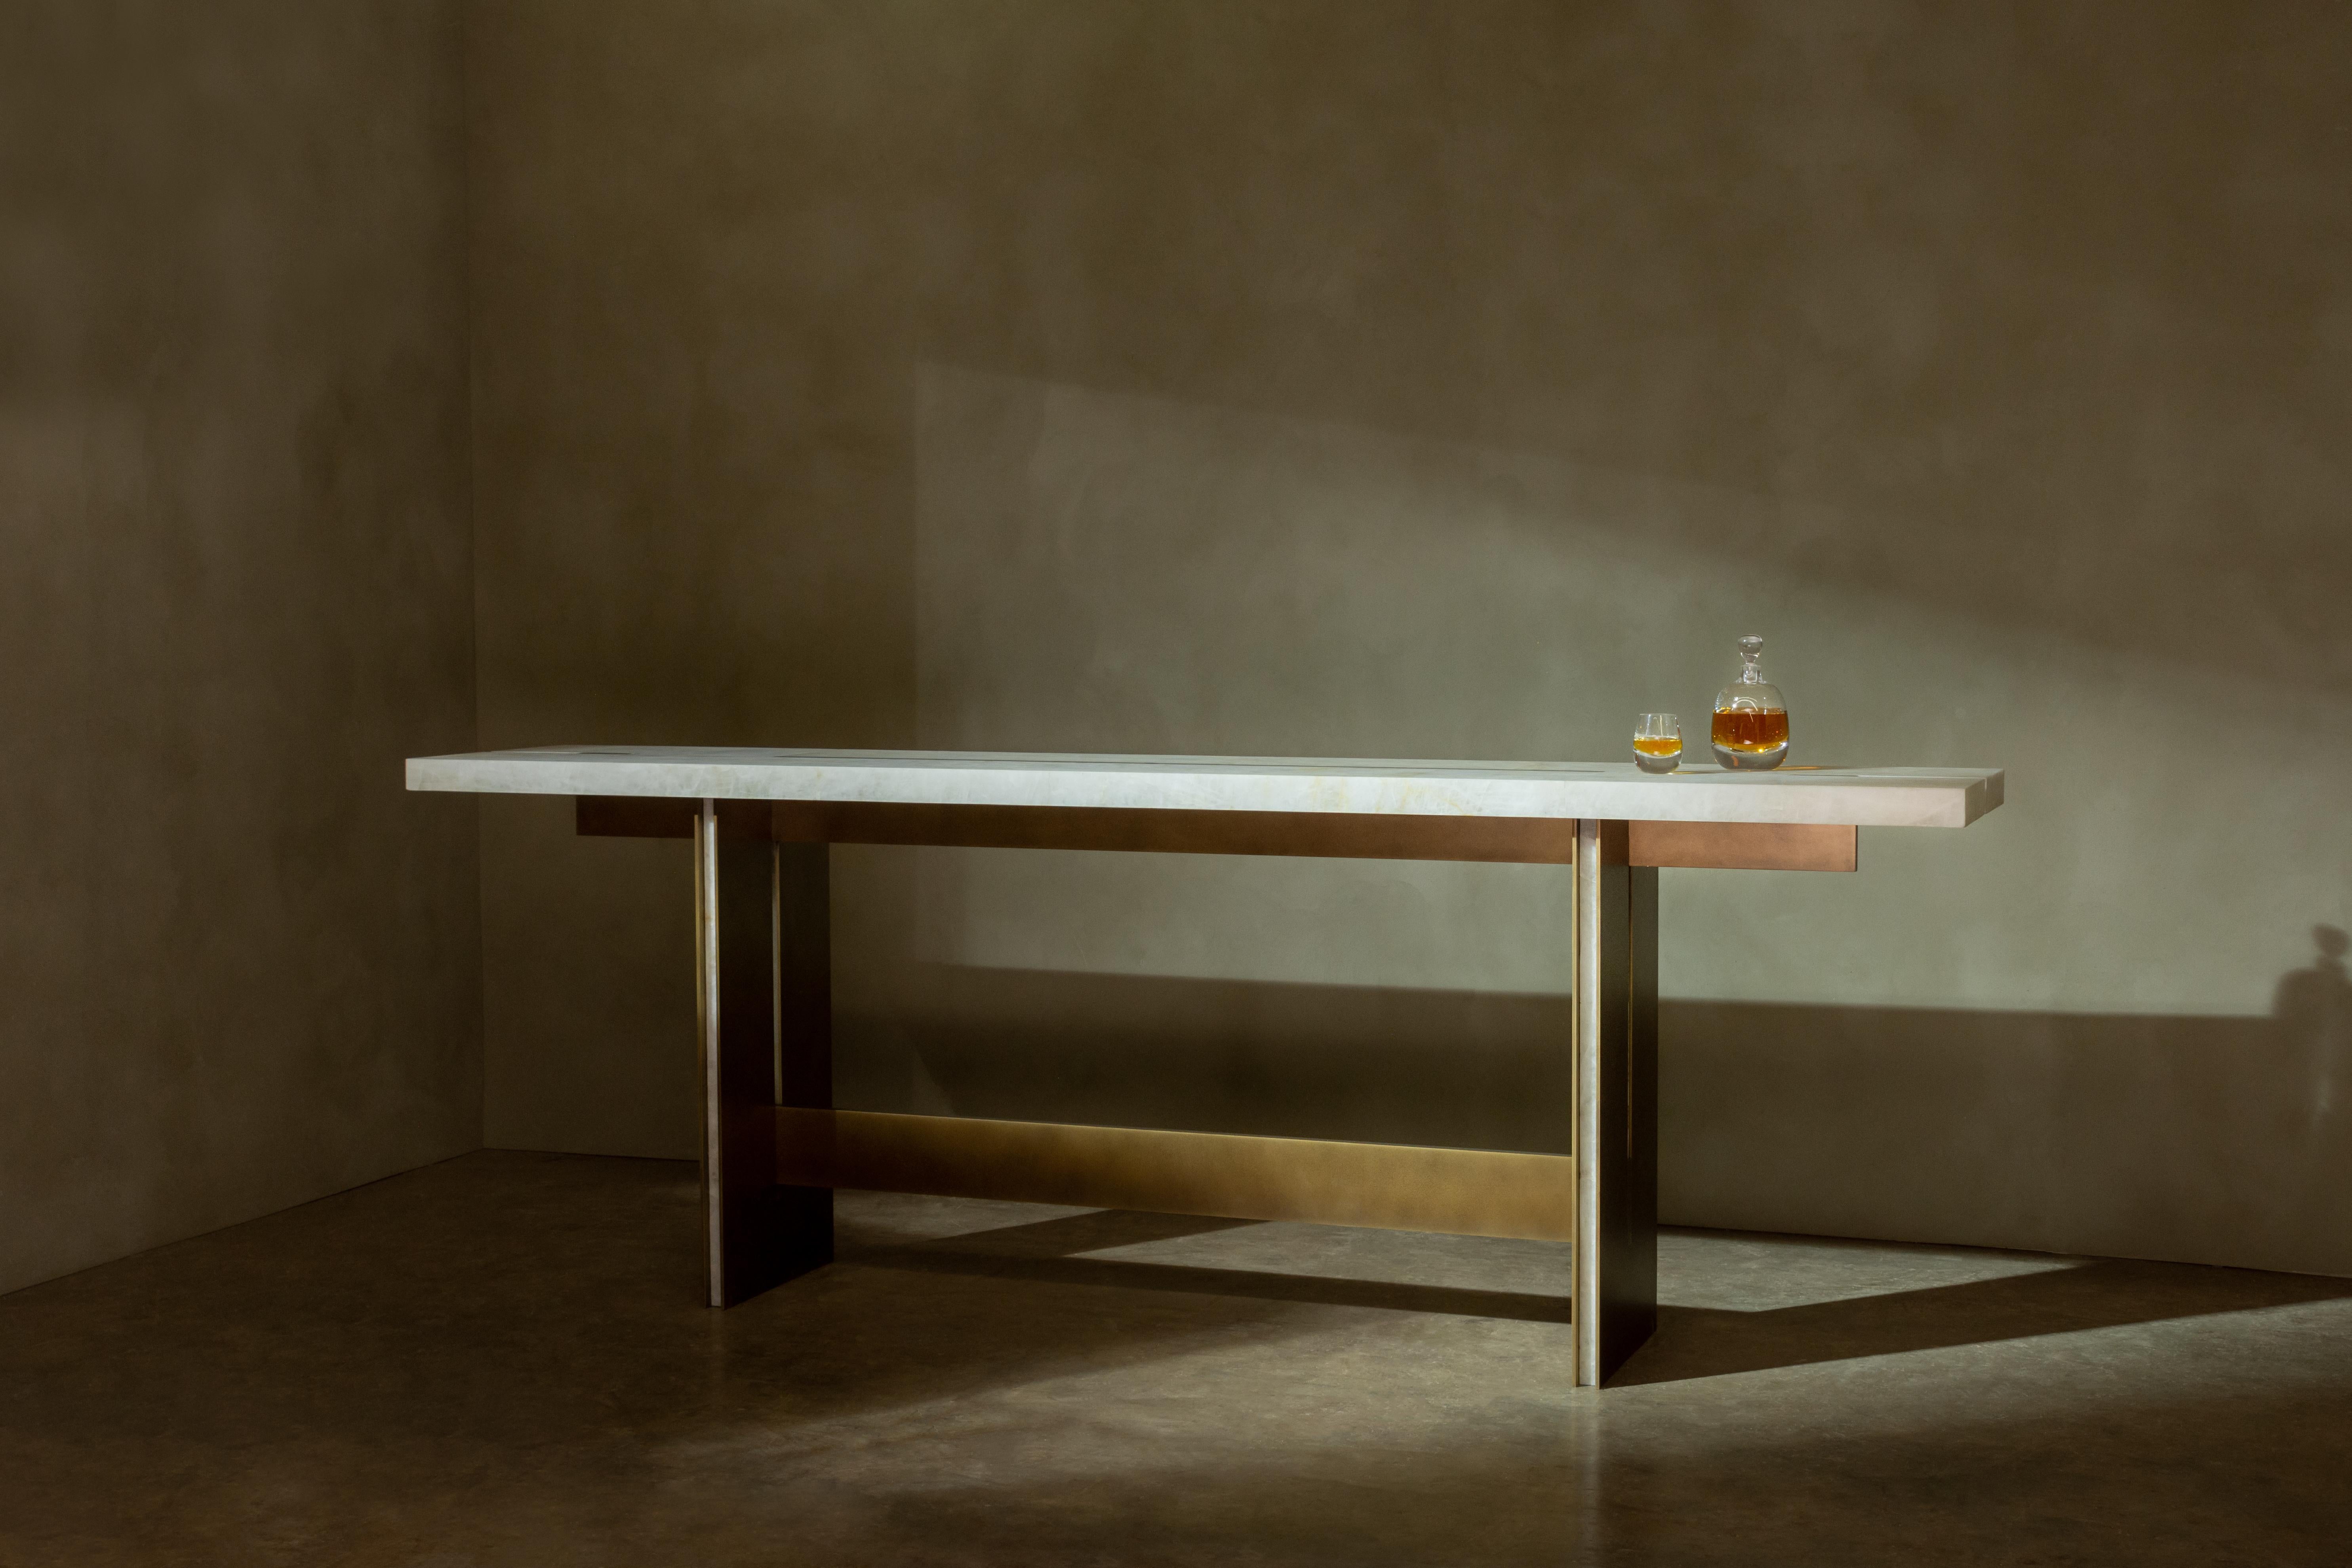 Bar-height table assembled from intersecting stone and metal elements that form clean, geo- metric compositions. The detailing of stone and metal inlays along with precise cutouts refine the minimalist design.